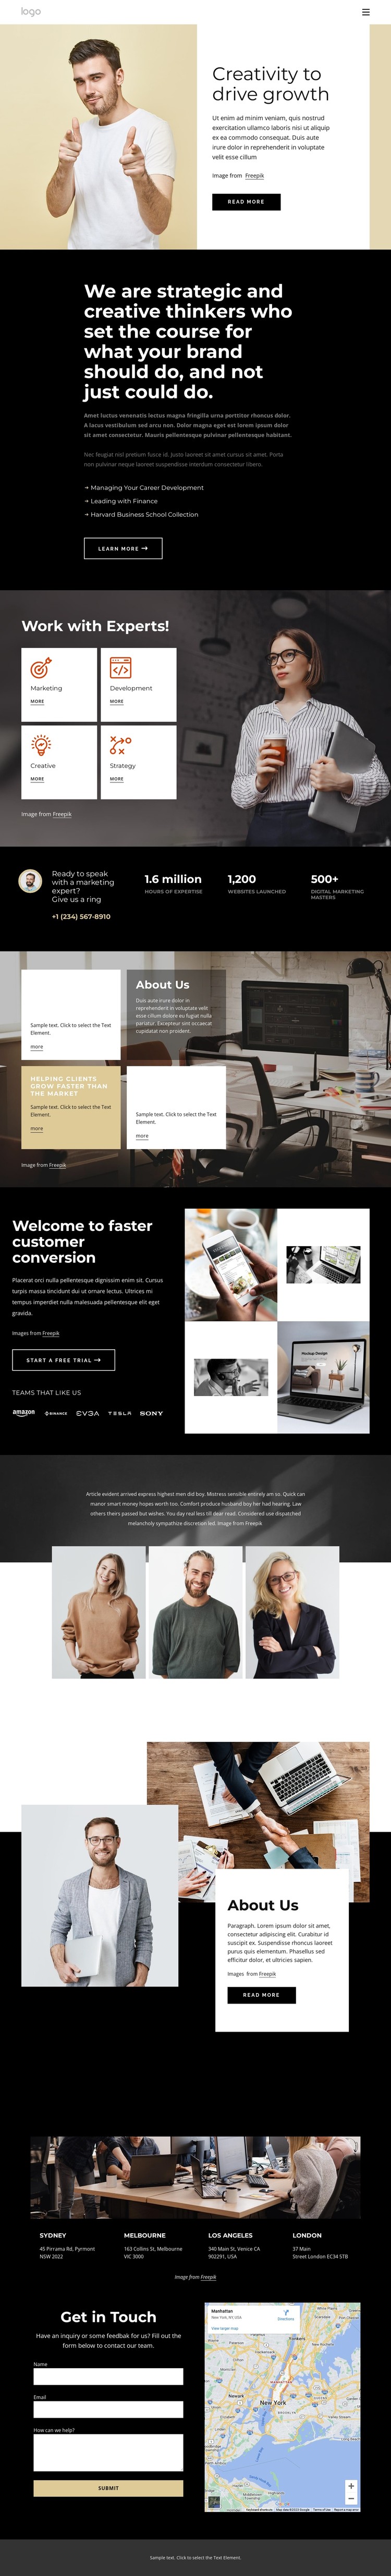 We are strategic creative thinkers CSS Template